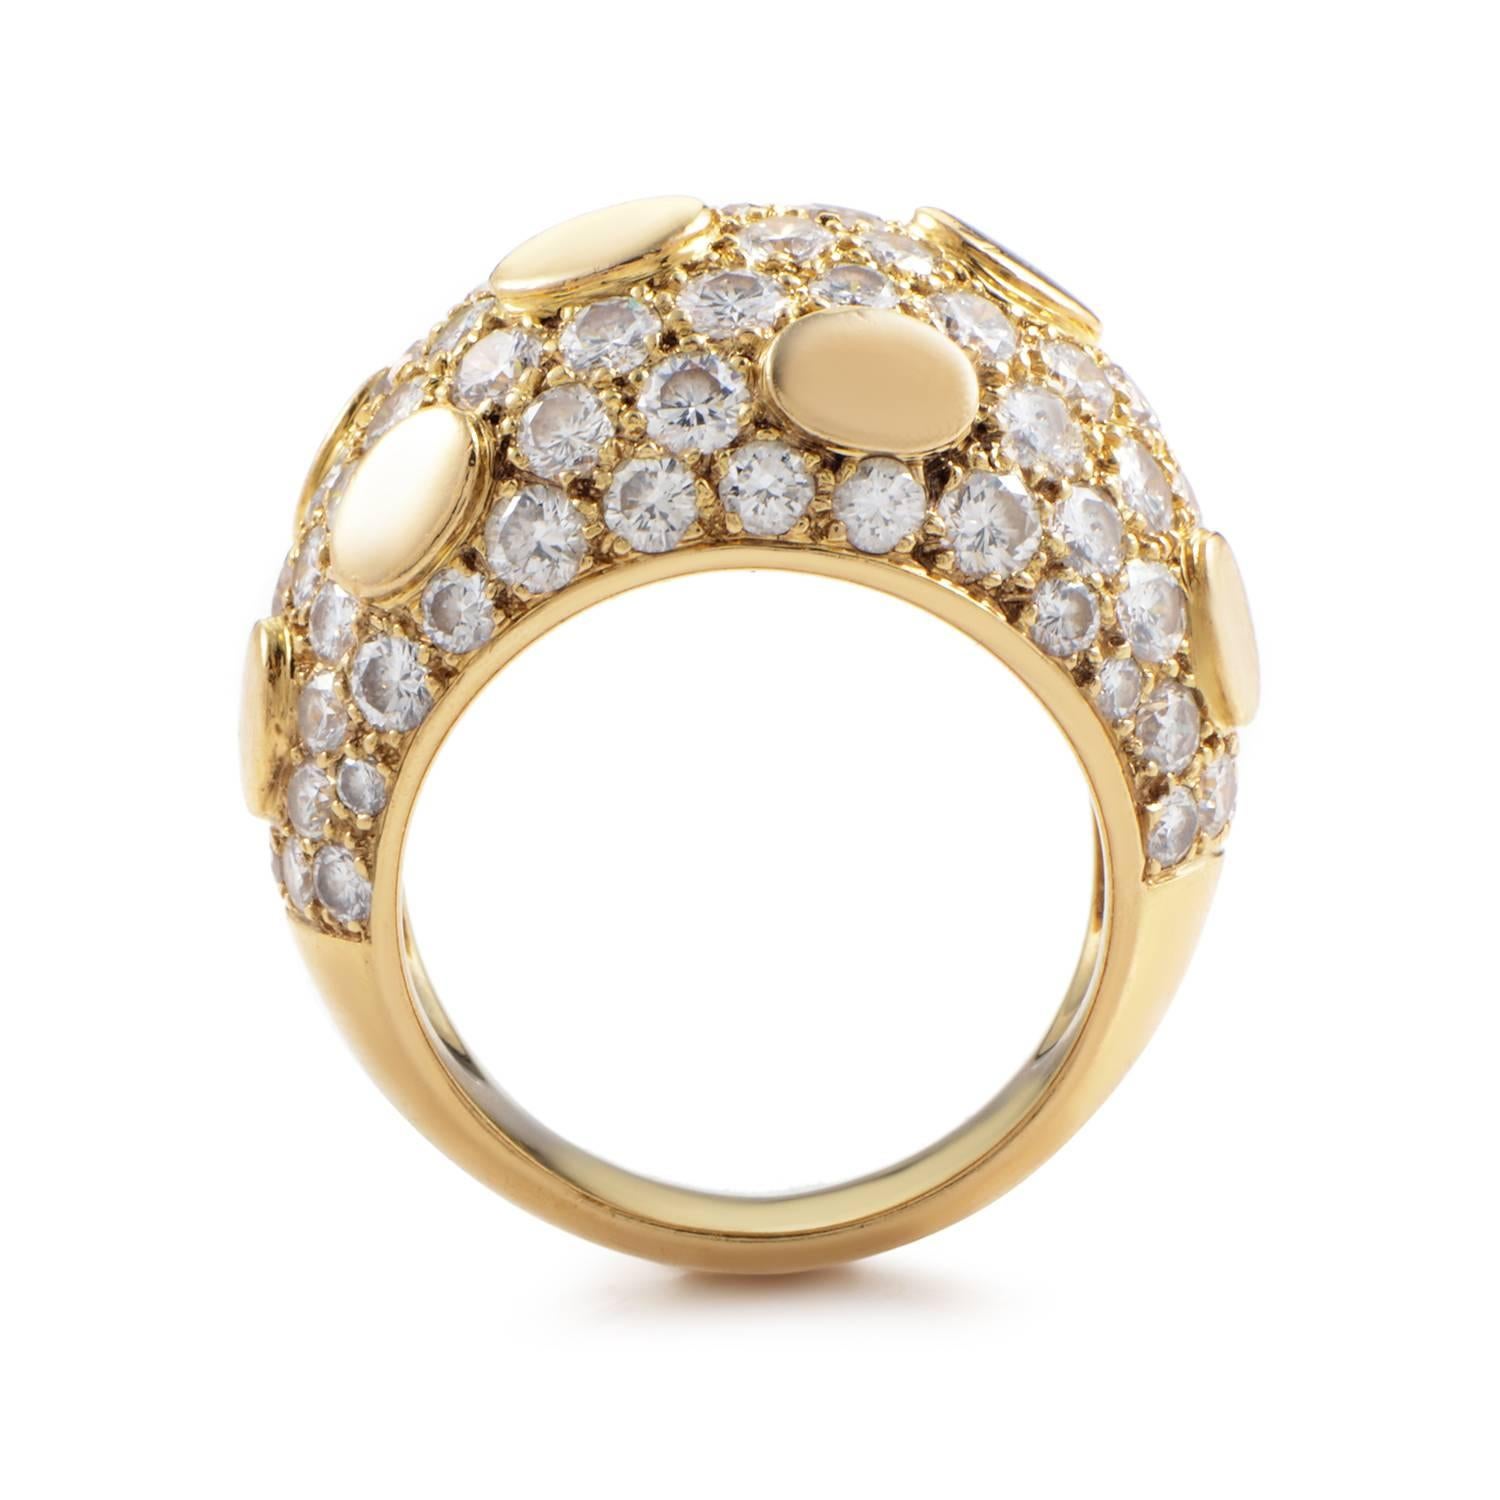 A stunning ring design from Van Cleef & Arpels. The band gathers rapidly into a broad expanse of 18K Yellow Gold. Small islands of the gold rise up from a cascade of 3.90ct diamonds, creating a charming contrast between the precious ingredients.